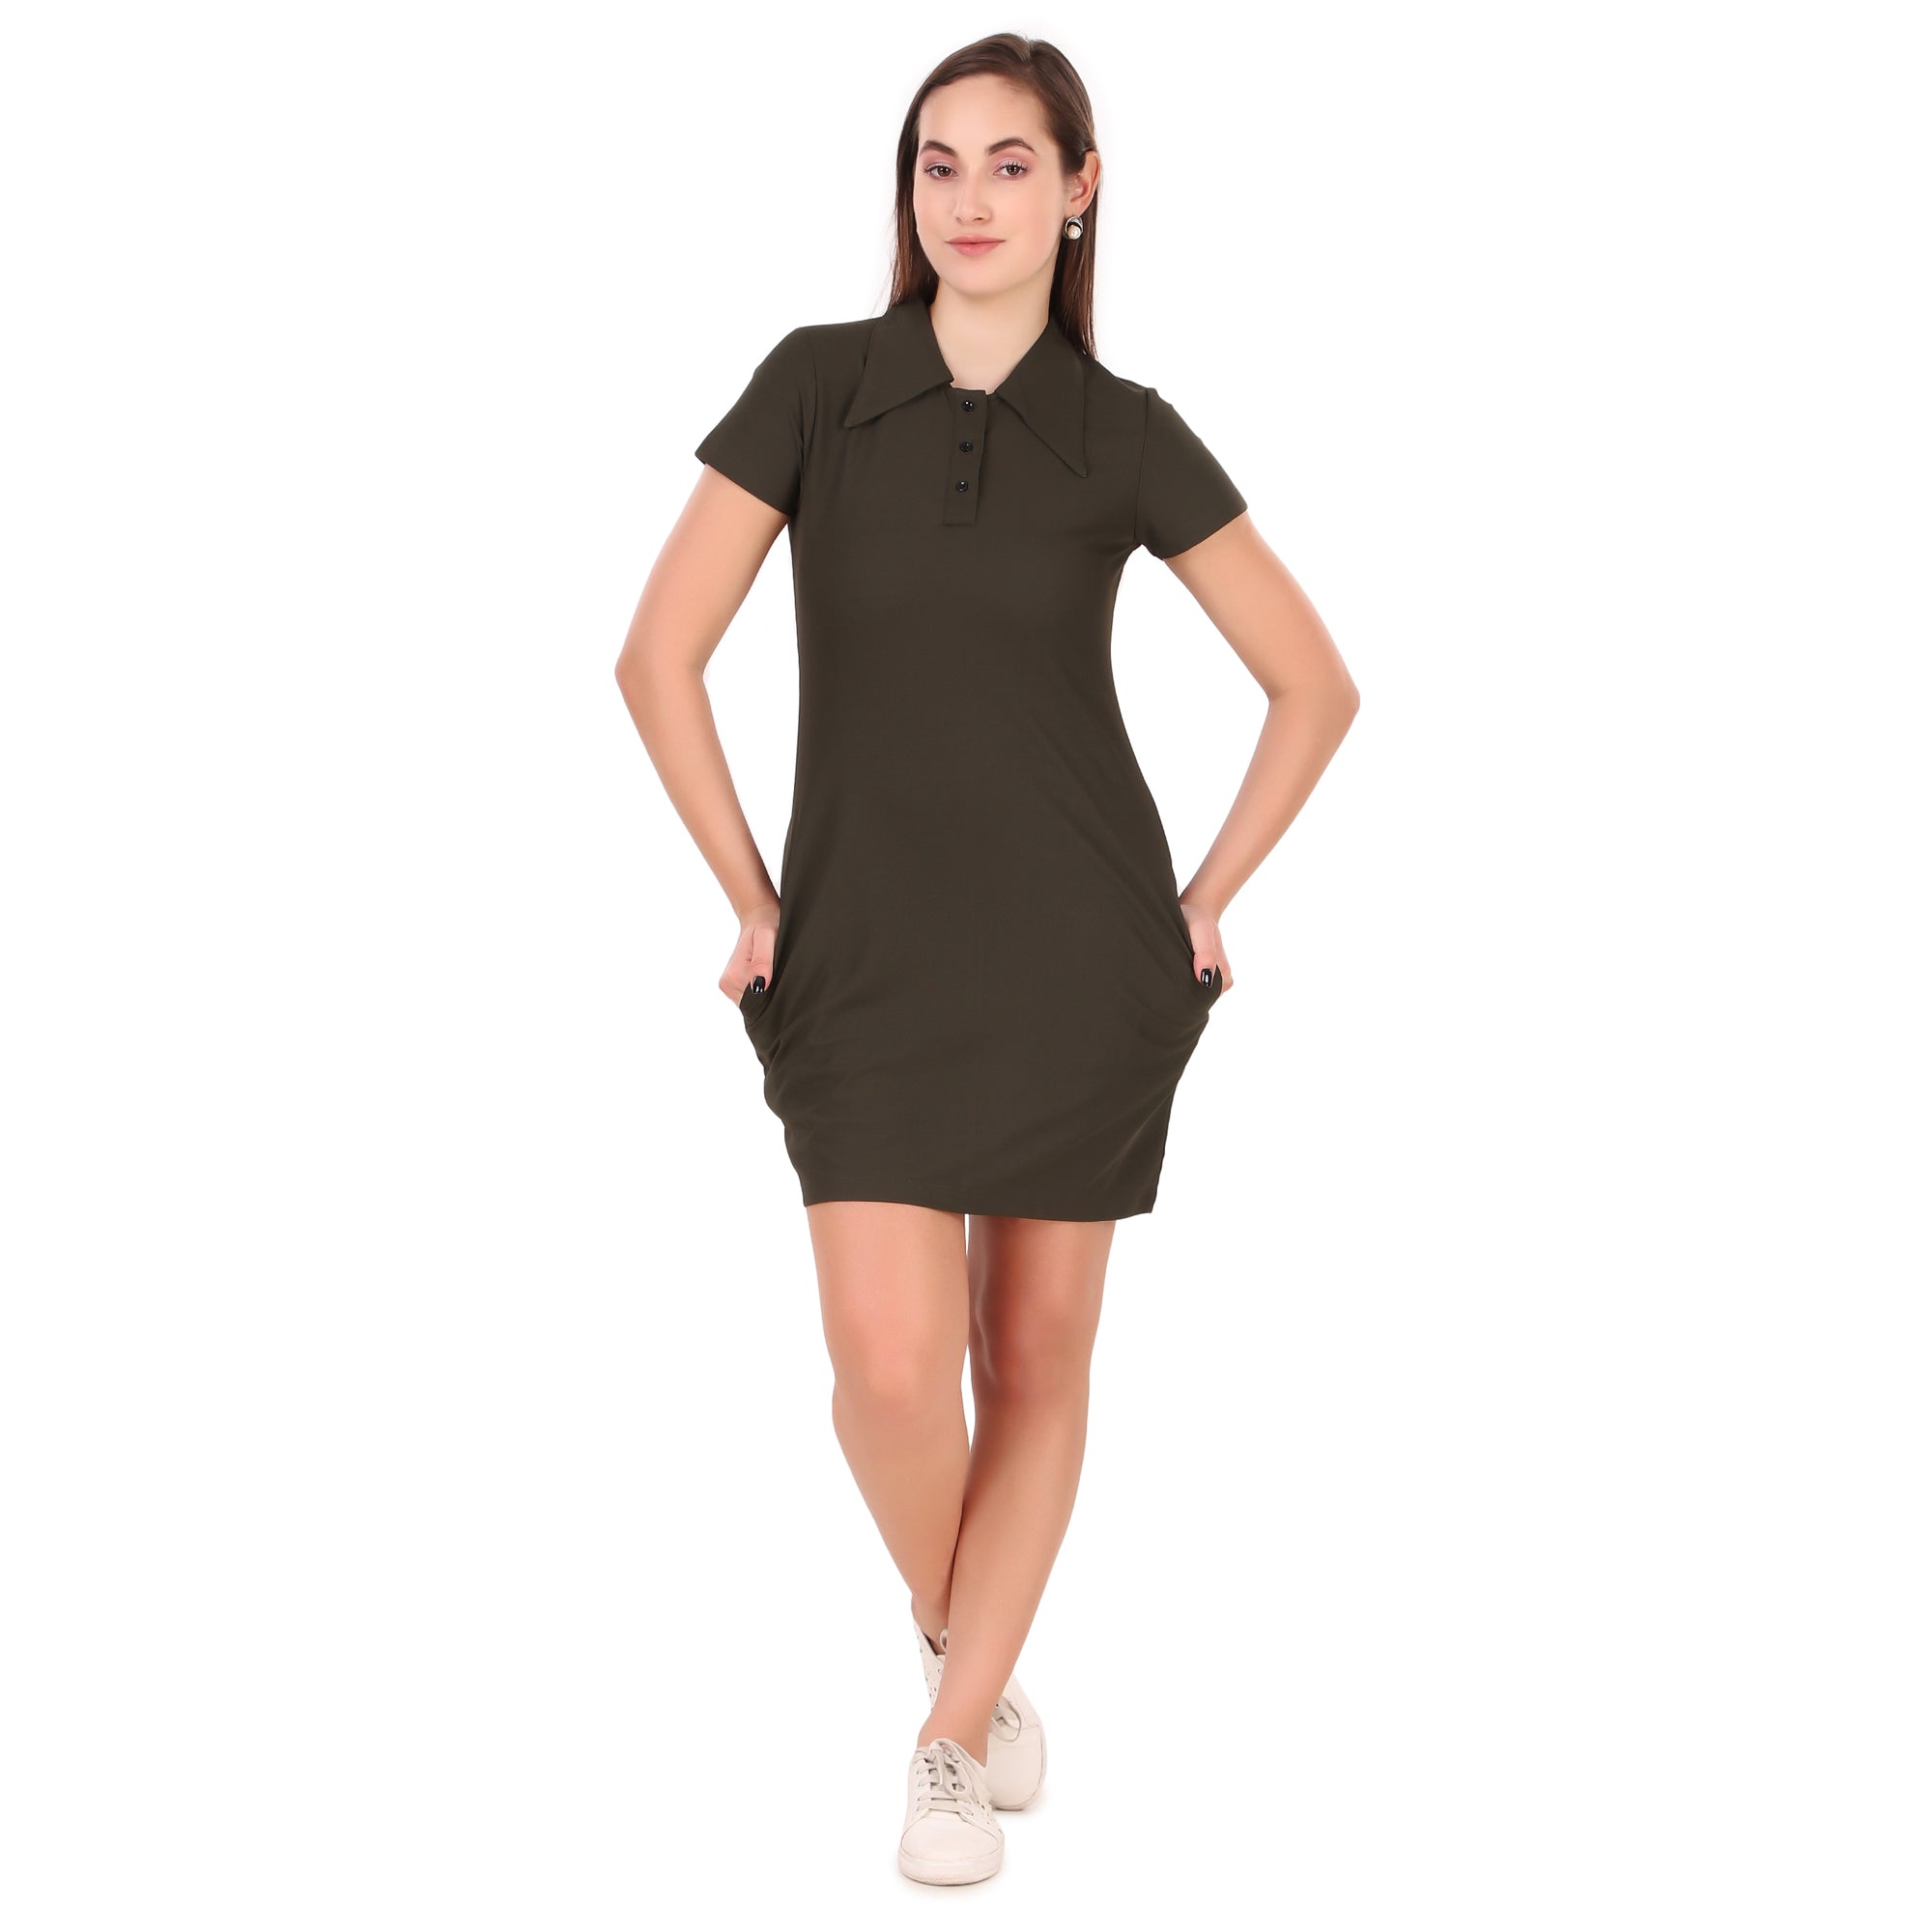 Activewear Collar Neck Dress For Women (Olive)